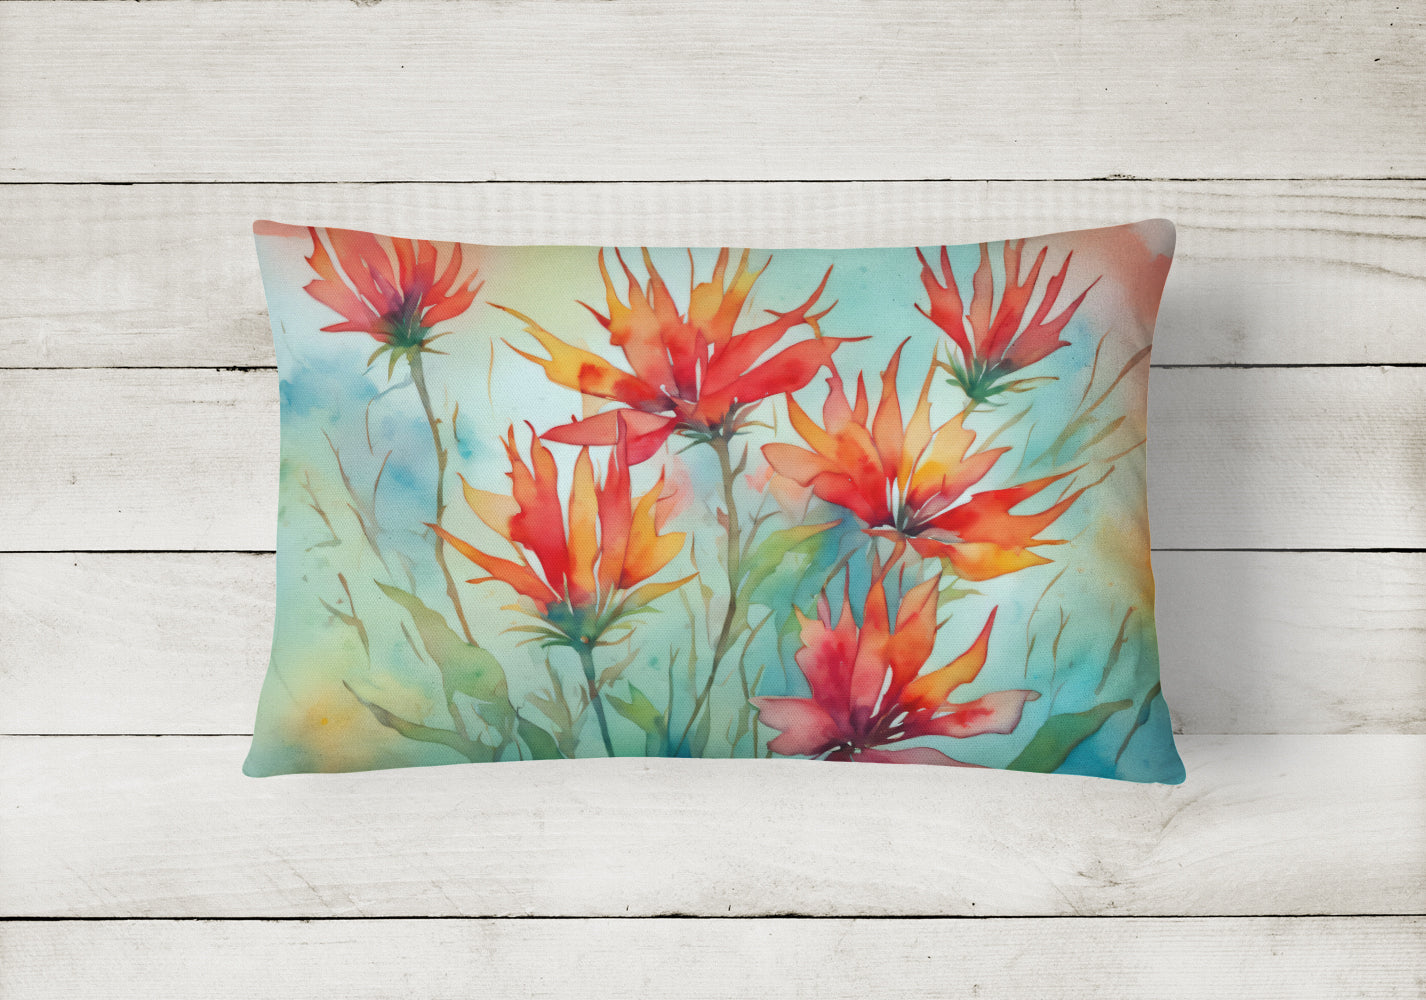 Wyoming Indian Paintbrush in Watercolor Fabric Decorative Pillow